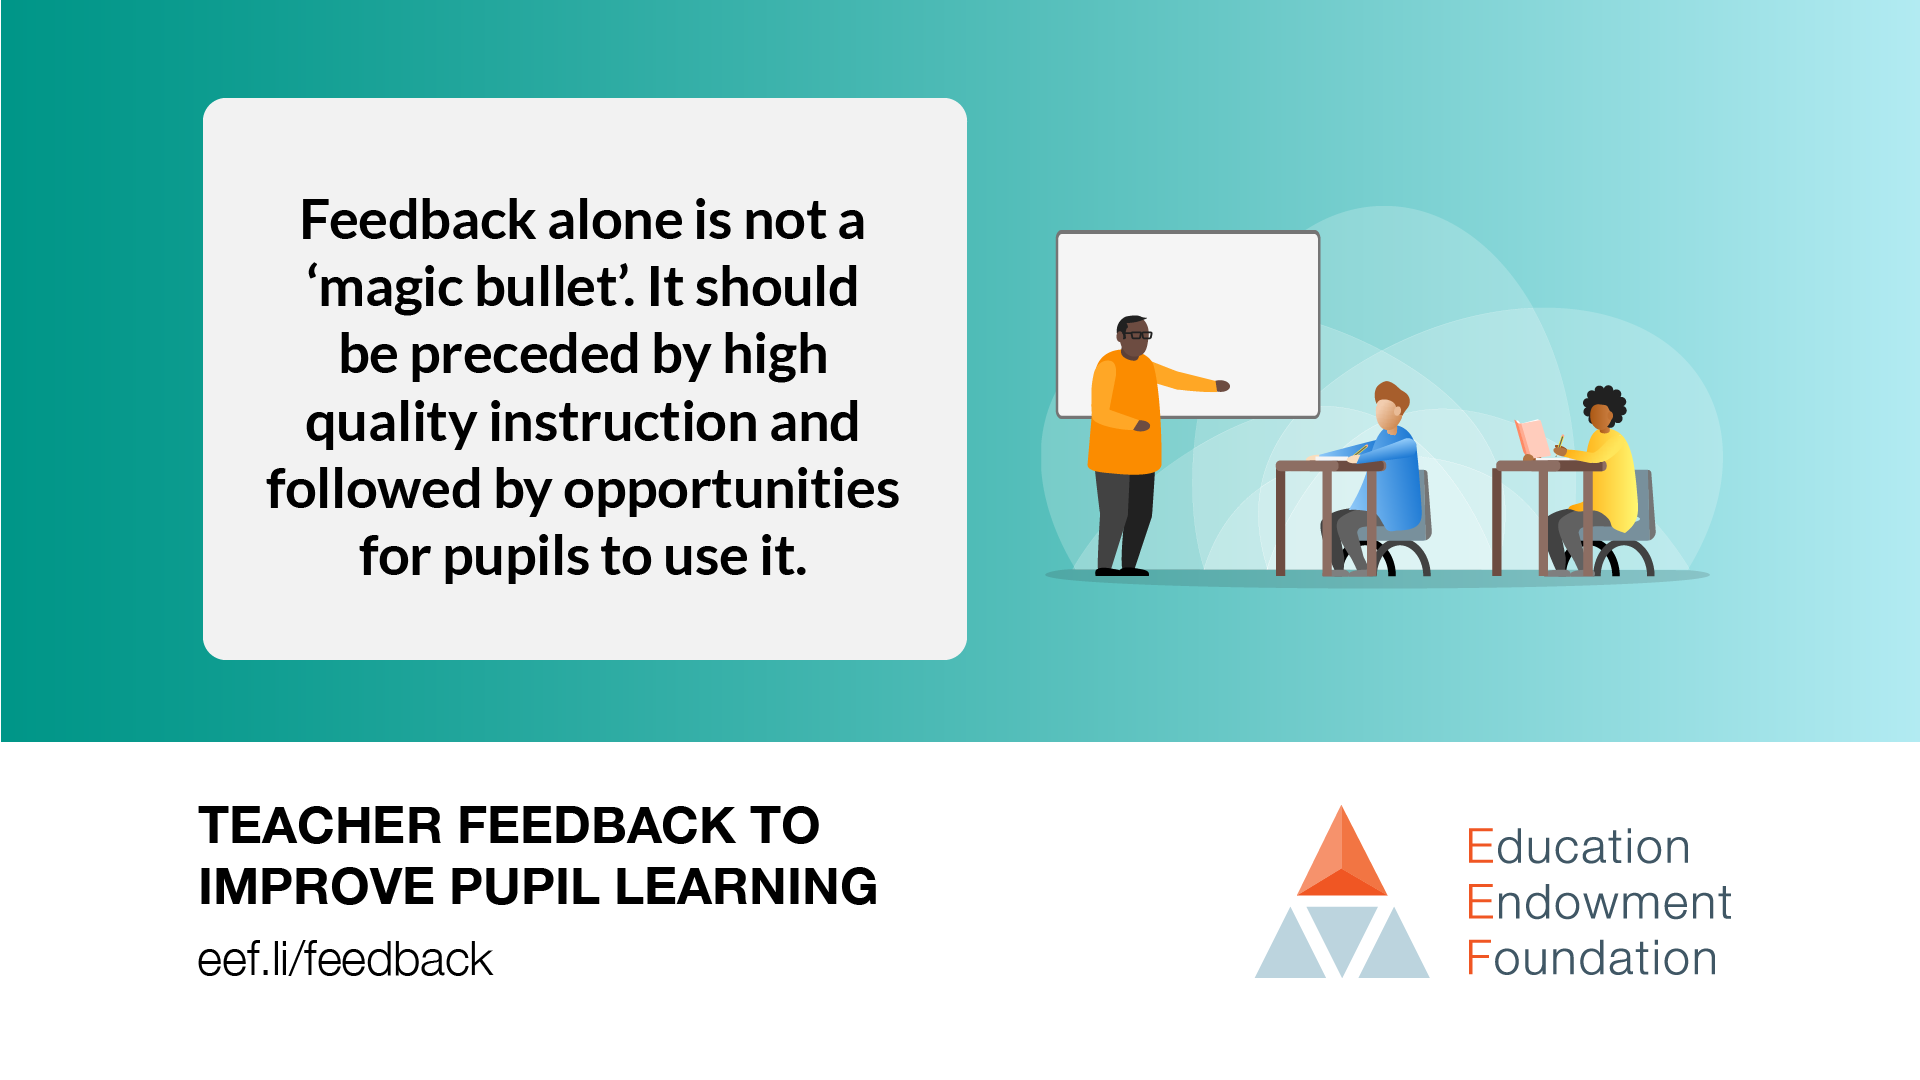 schuld Triviaal rekruut EEF on Twitter: "Want to know how to deliver feedback effectively to  improve pupil learning? Our new guidance report is an accessible overview  of existing research with clear, actionable guidance. Available now: